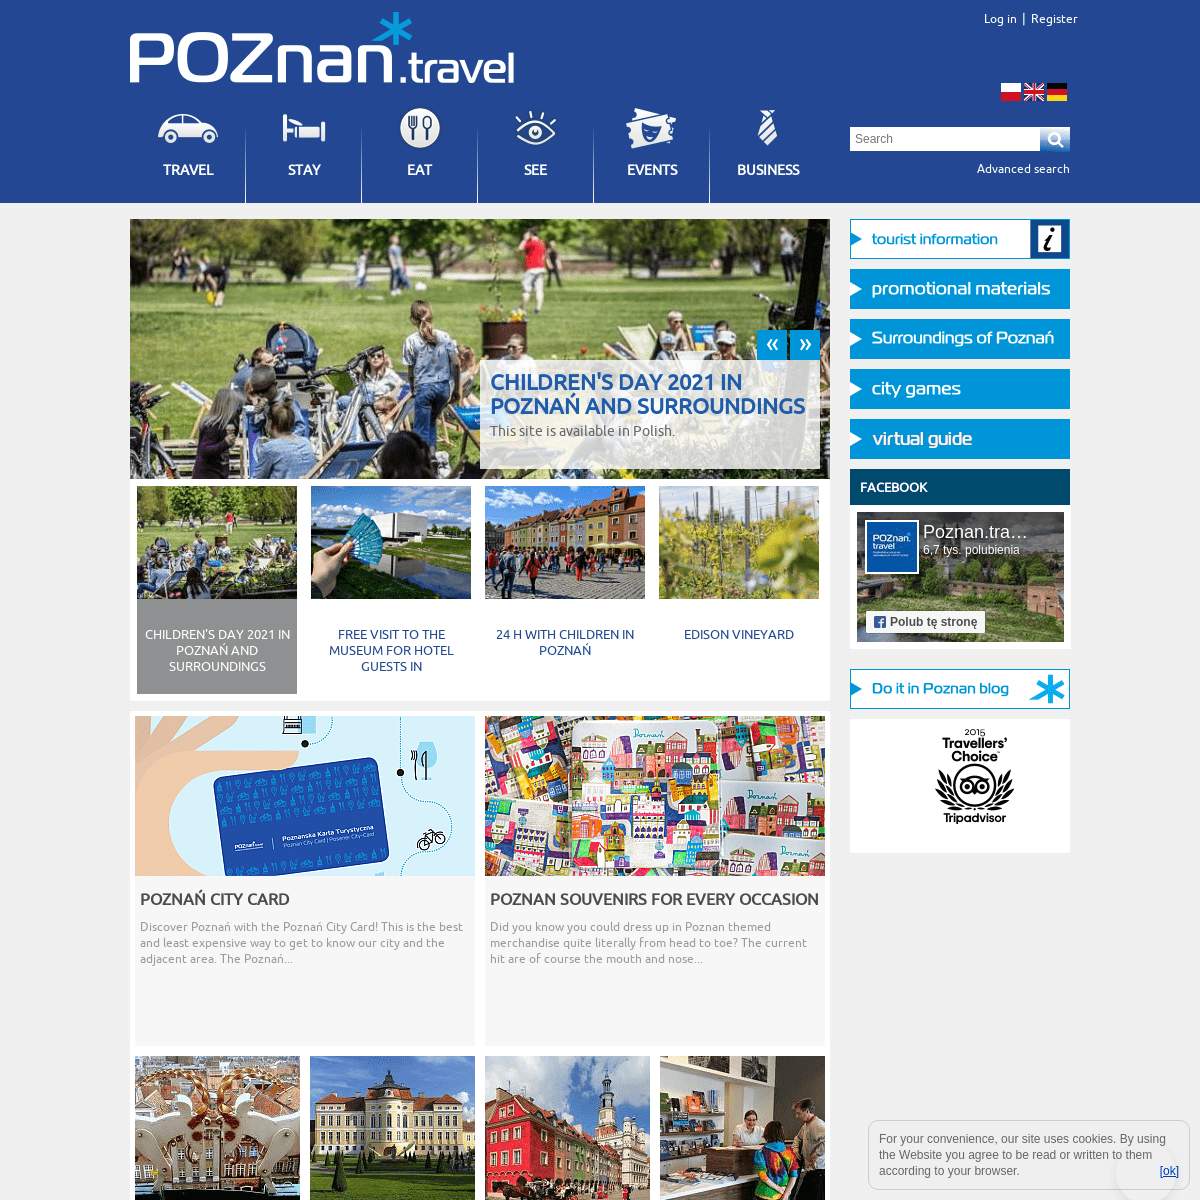 A complete backup of https://poznan.travel